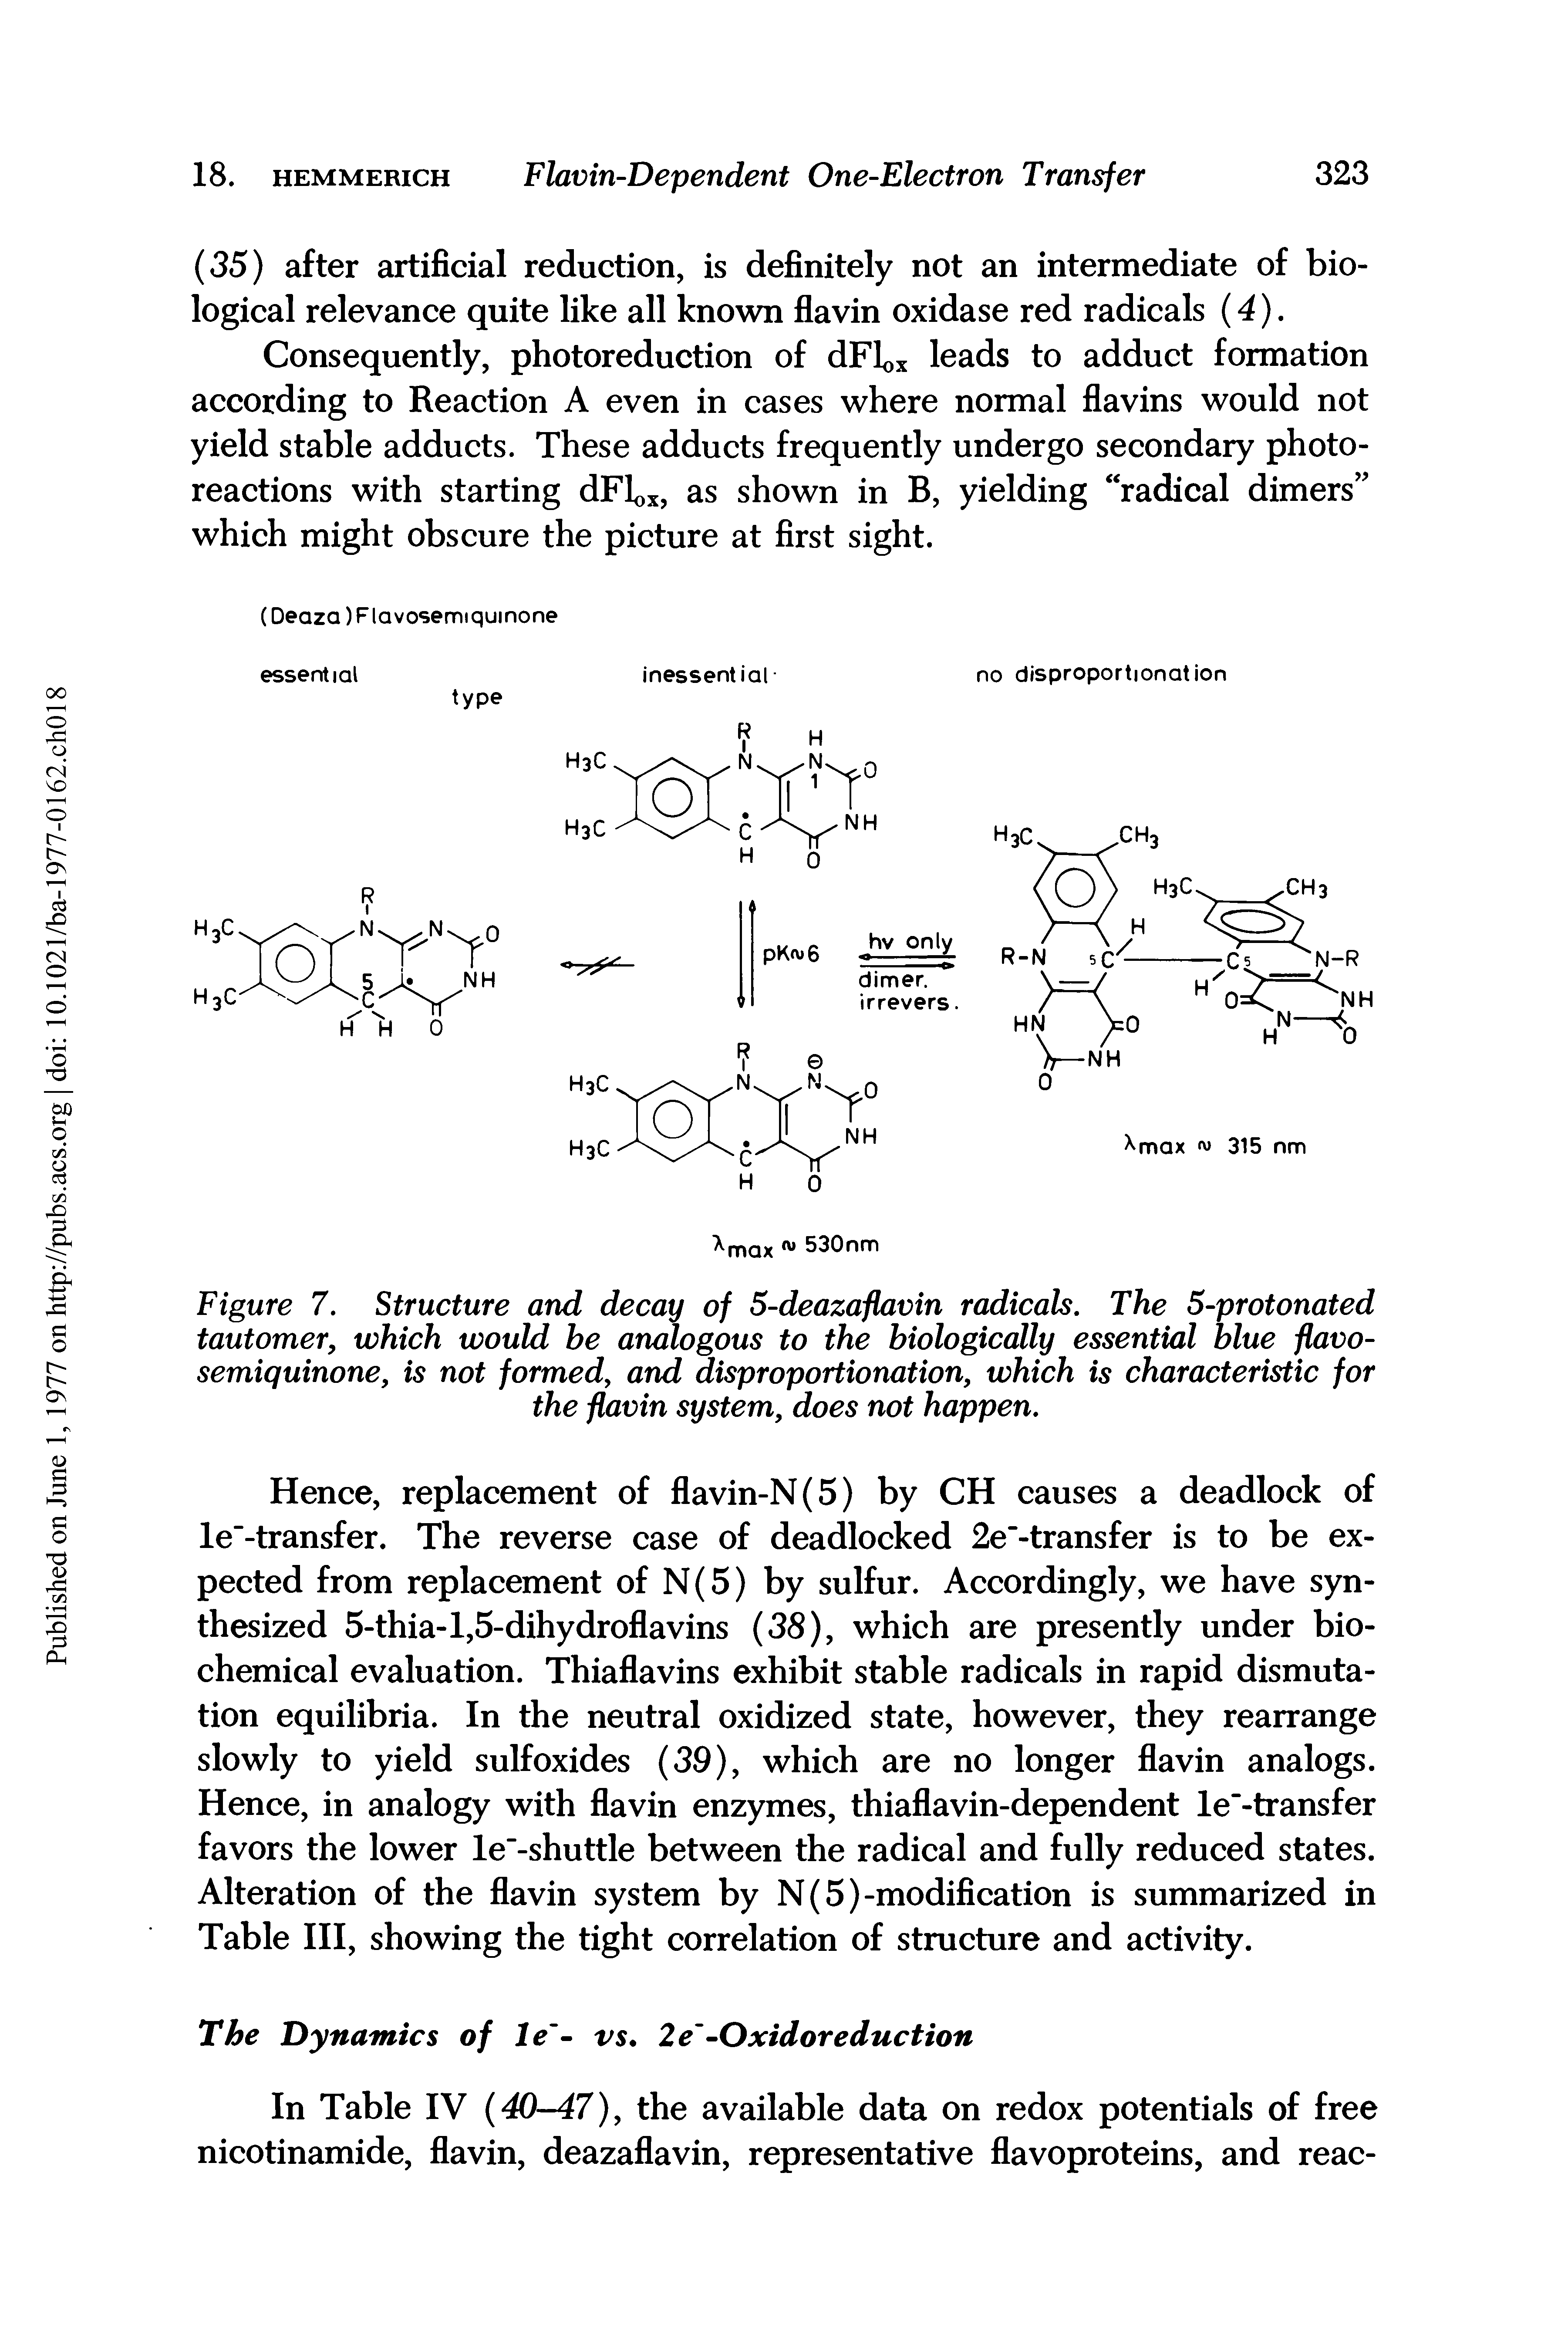 Figure 7. Structure and decay of 5-deazaflavin radicals. The 5-protonated tautomer, which would be analogous to the biologically essential blue flavo-semiquinone, is not formed, and disproportionation, which is characteristic for the flavin system, does not happen.